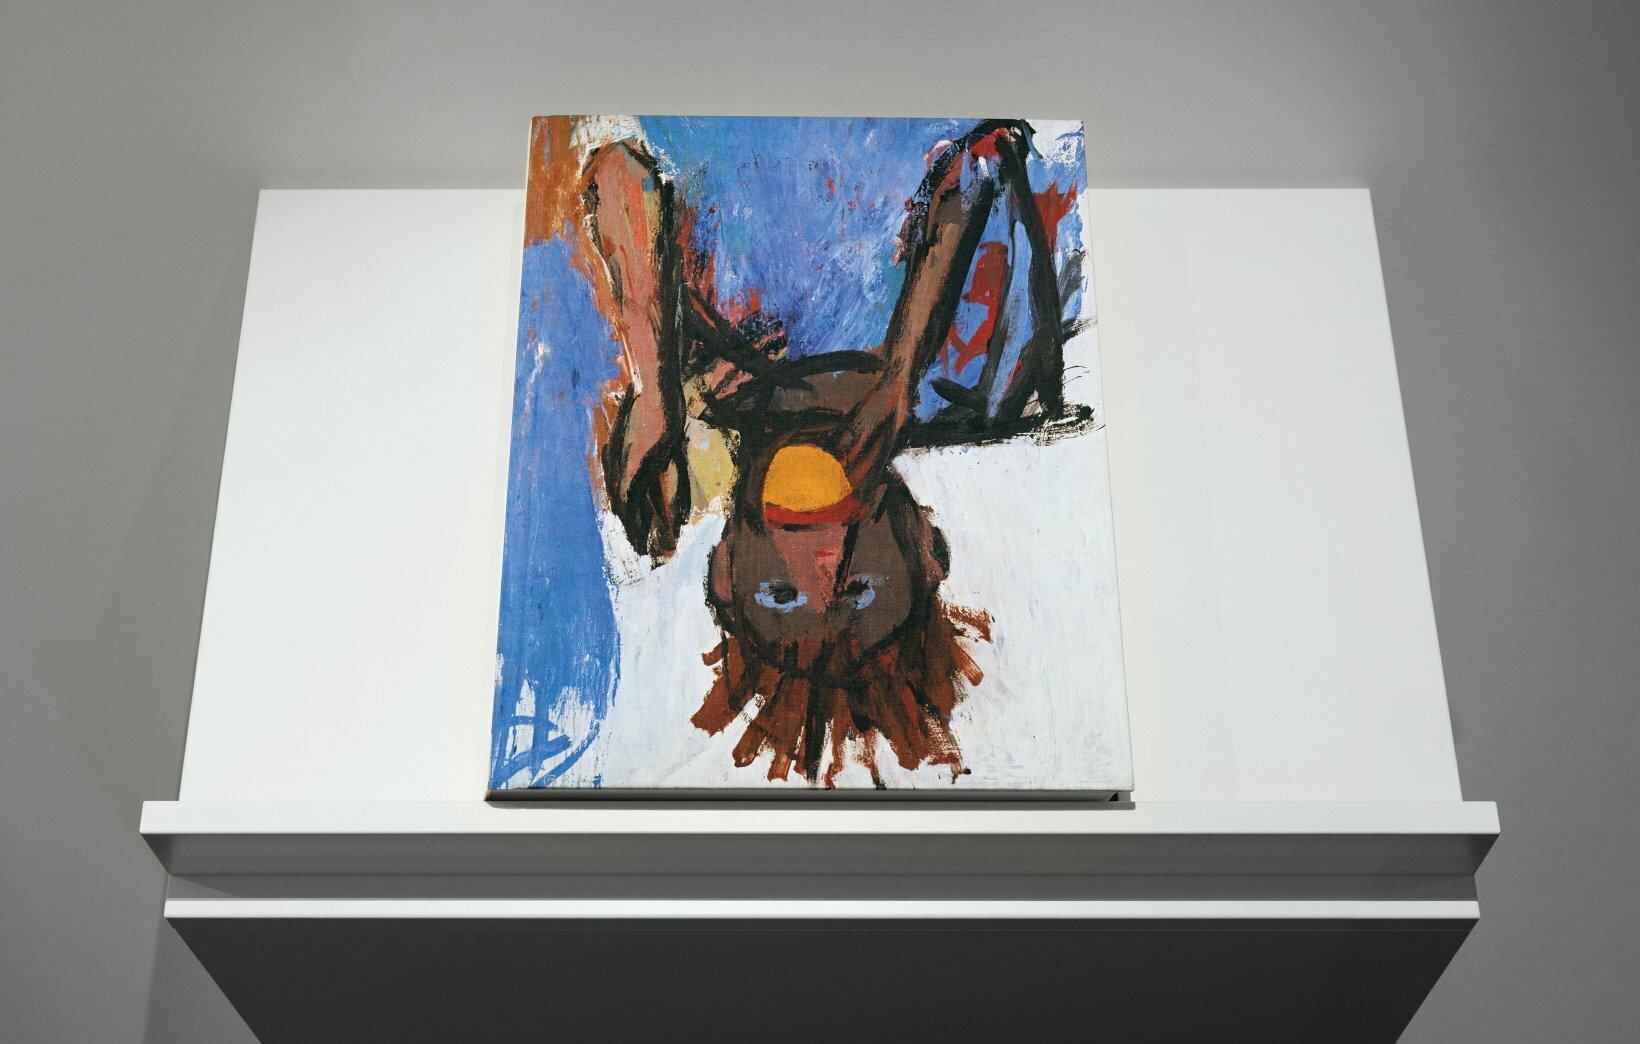 The world seen upside down.
The paintings and sculptures of Georg Baselitz.
Proverbially known for the audaciously simple but game-changing strategy of painting the motif on its head, Georg Baselitz has been a consistently challenging artist since